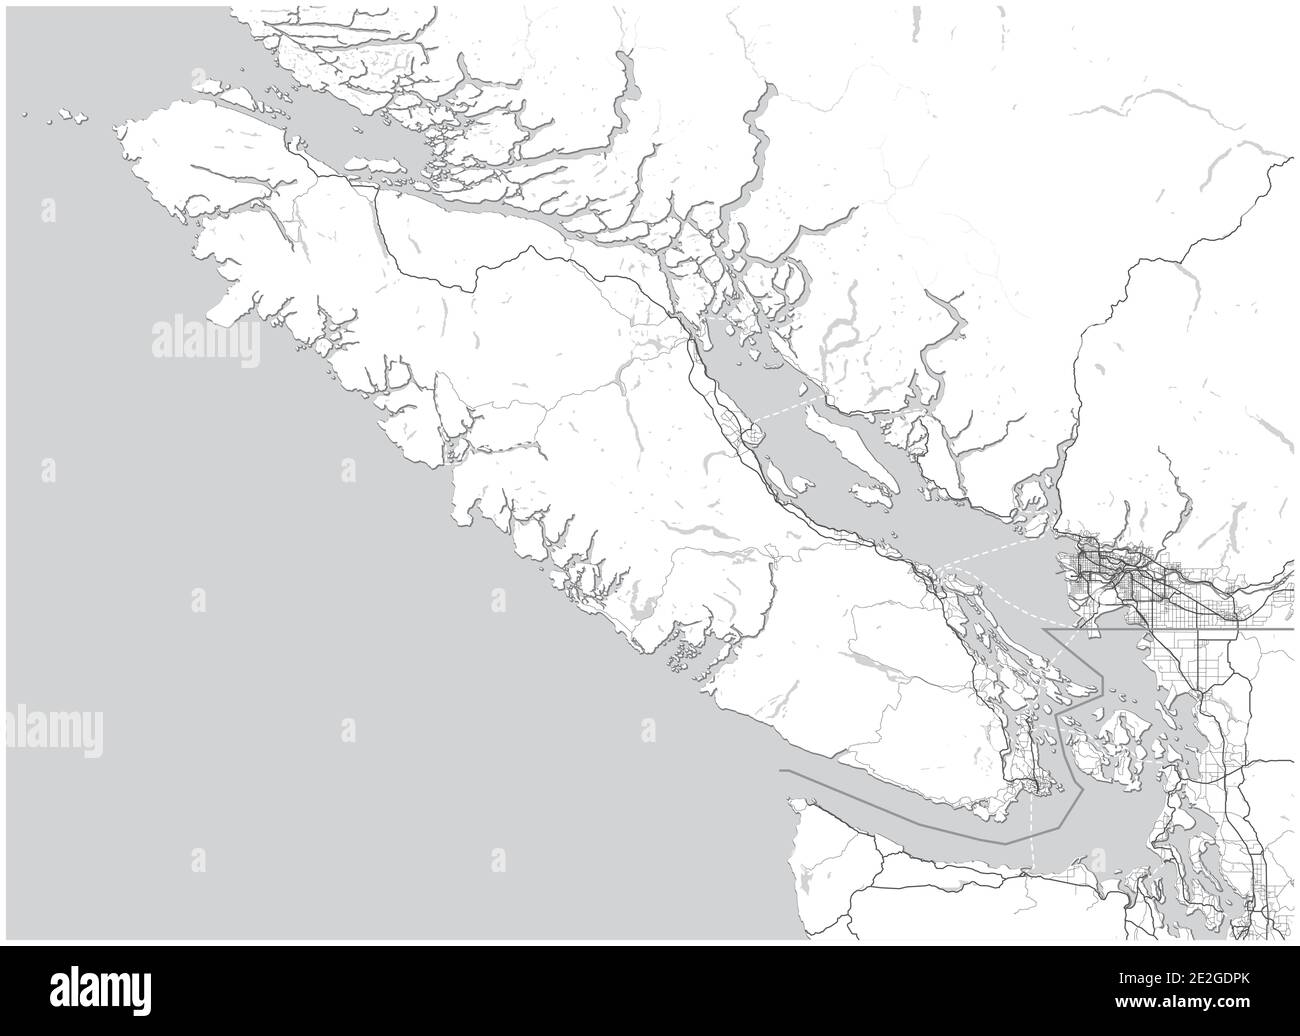 Vancouver Island Map with Greater Vancouver, British Columbia, Canada and parts of Washington State, United States. Simple grey scale map without text Stock Vector